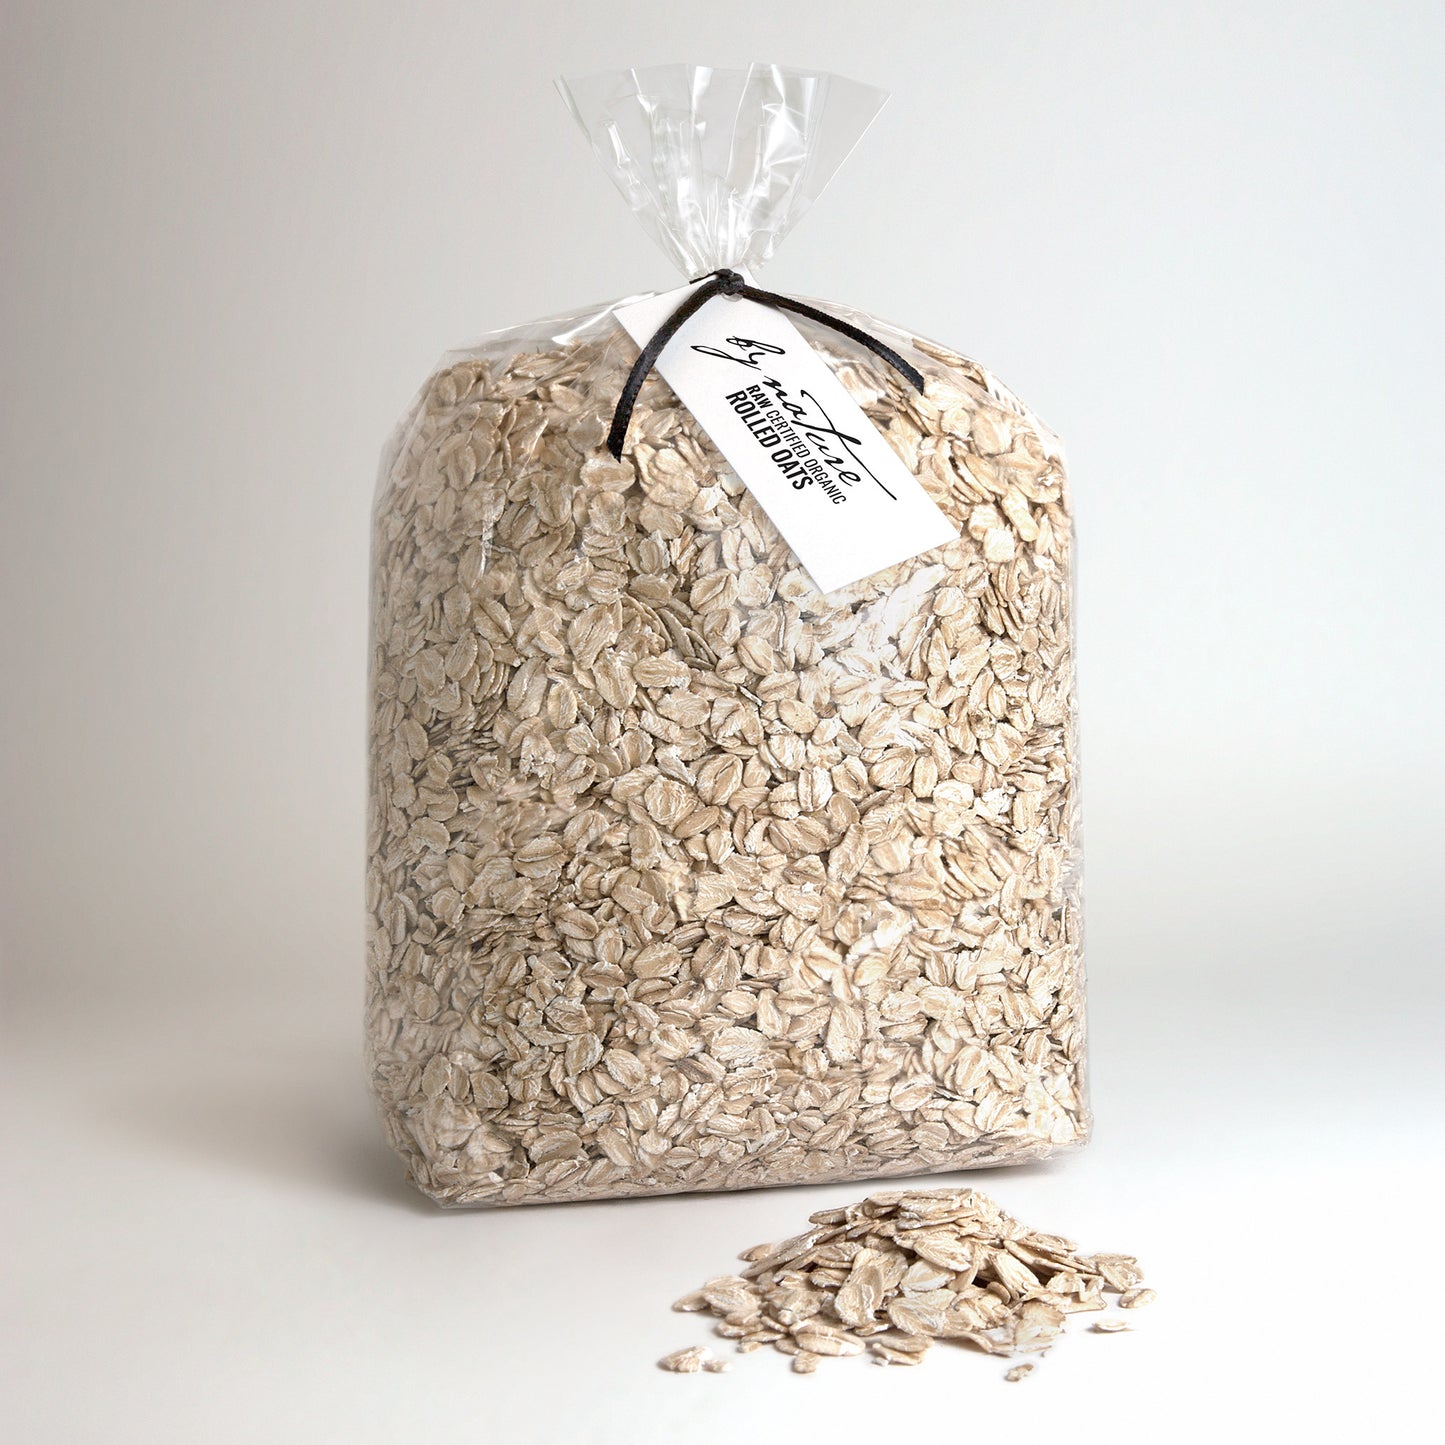 BY NATURE Rolled Oats, 1kg - raw, certified organic at source.